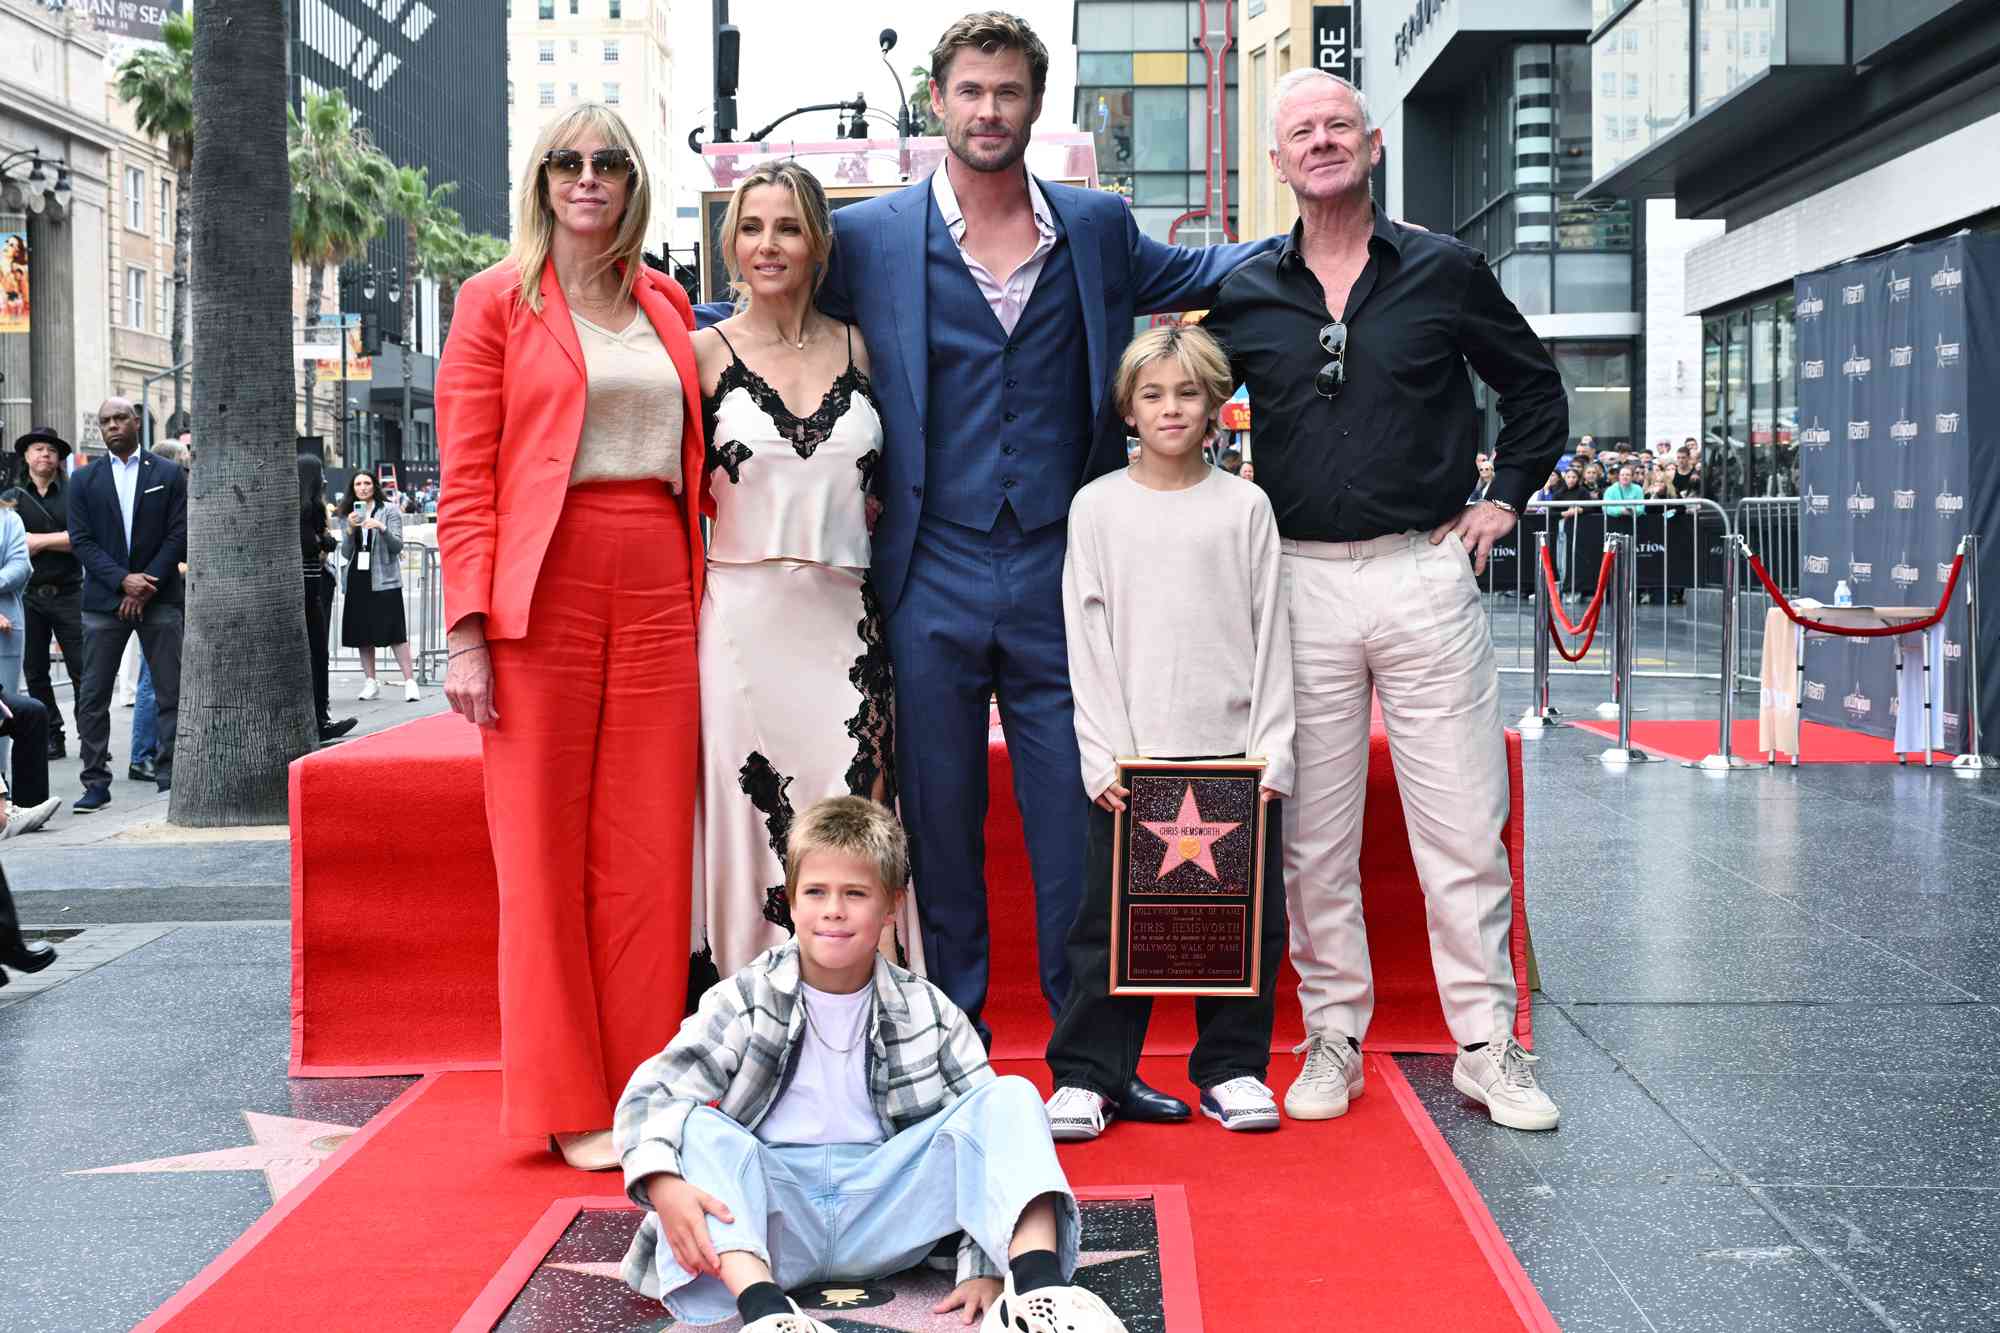 Chris Hemsworth and Wife Elsa Pataky Bring All Three of Their Kids to Hollywood Walk of Fame Ceremony